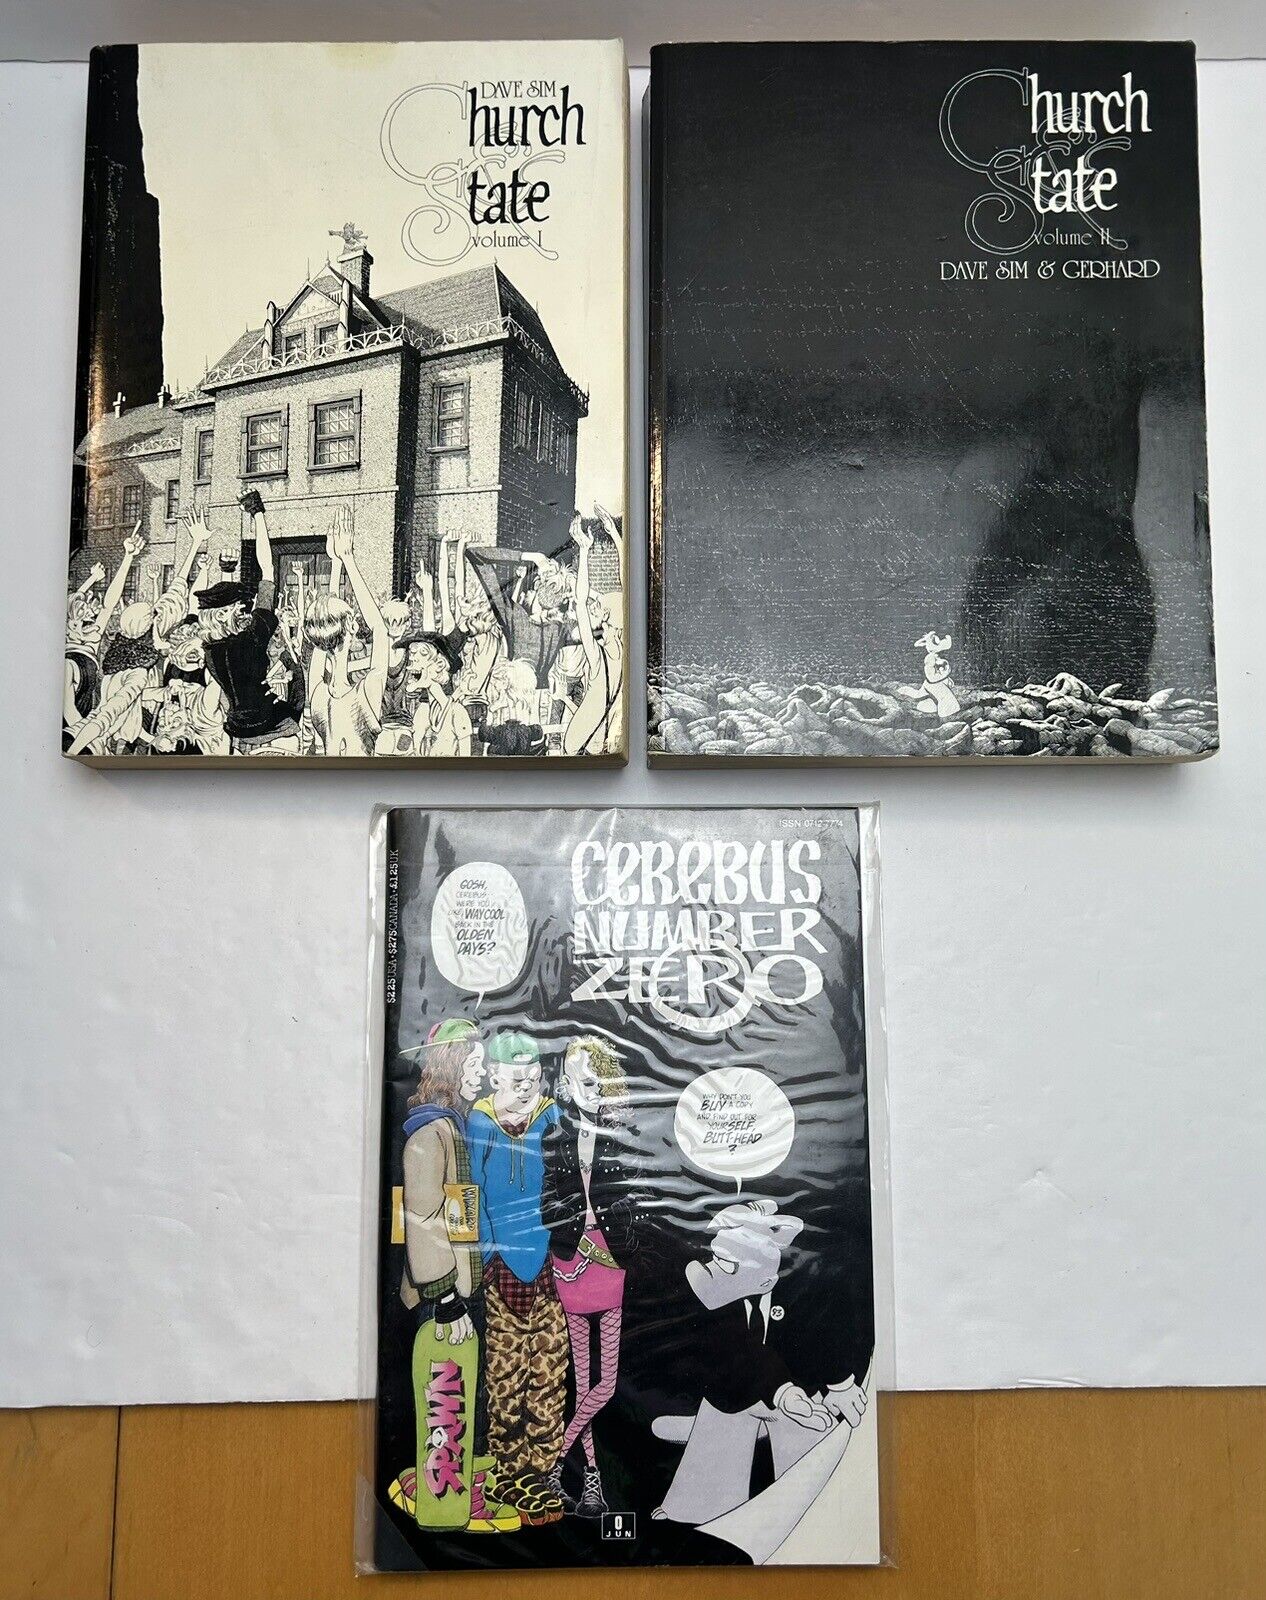 Cerebus Church And State Volume I and II by Dave Sim Paperback + Number Zero